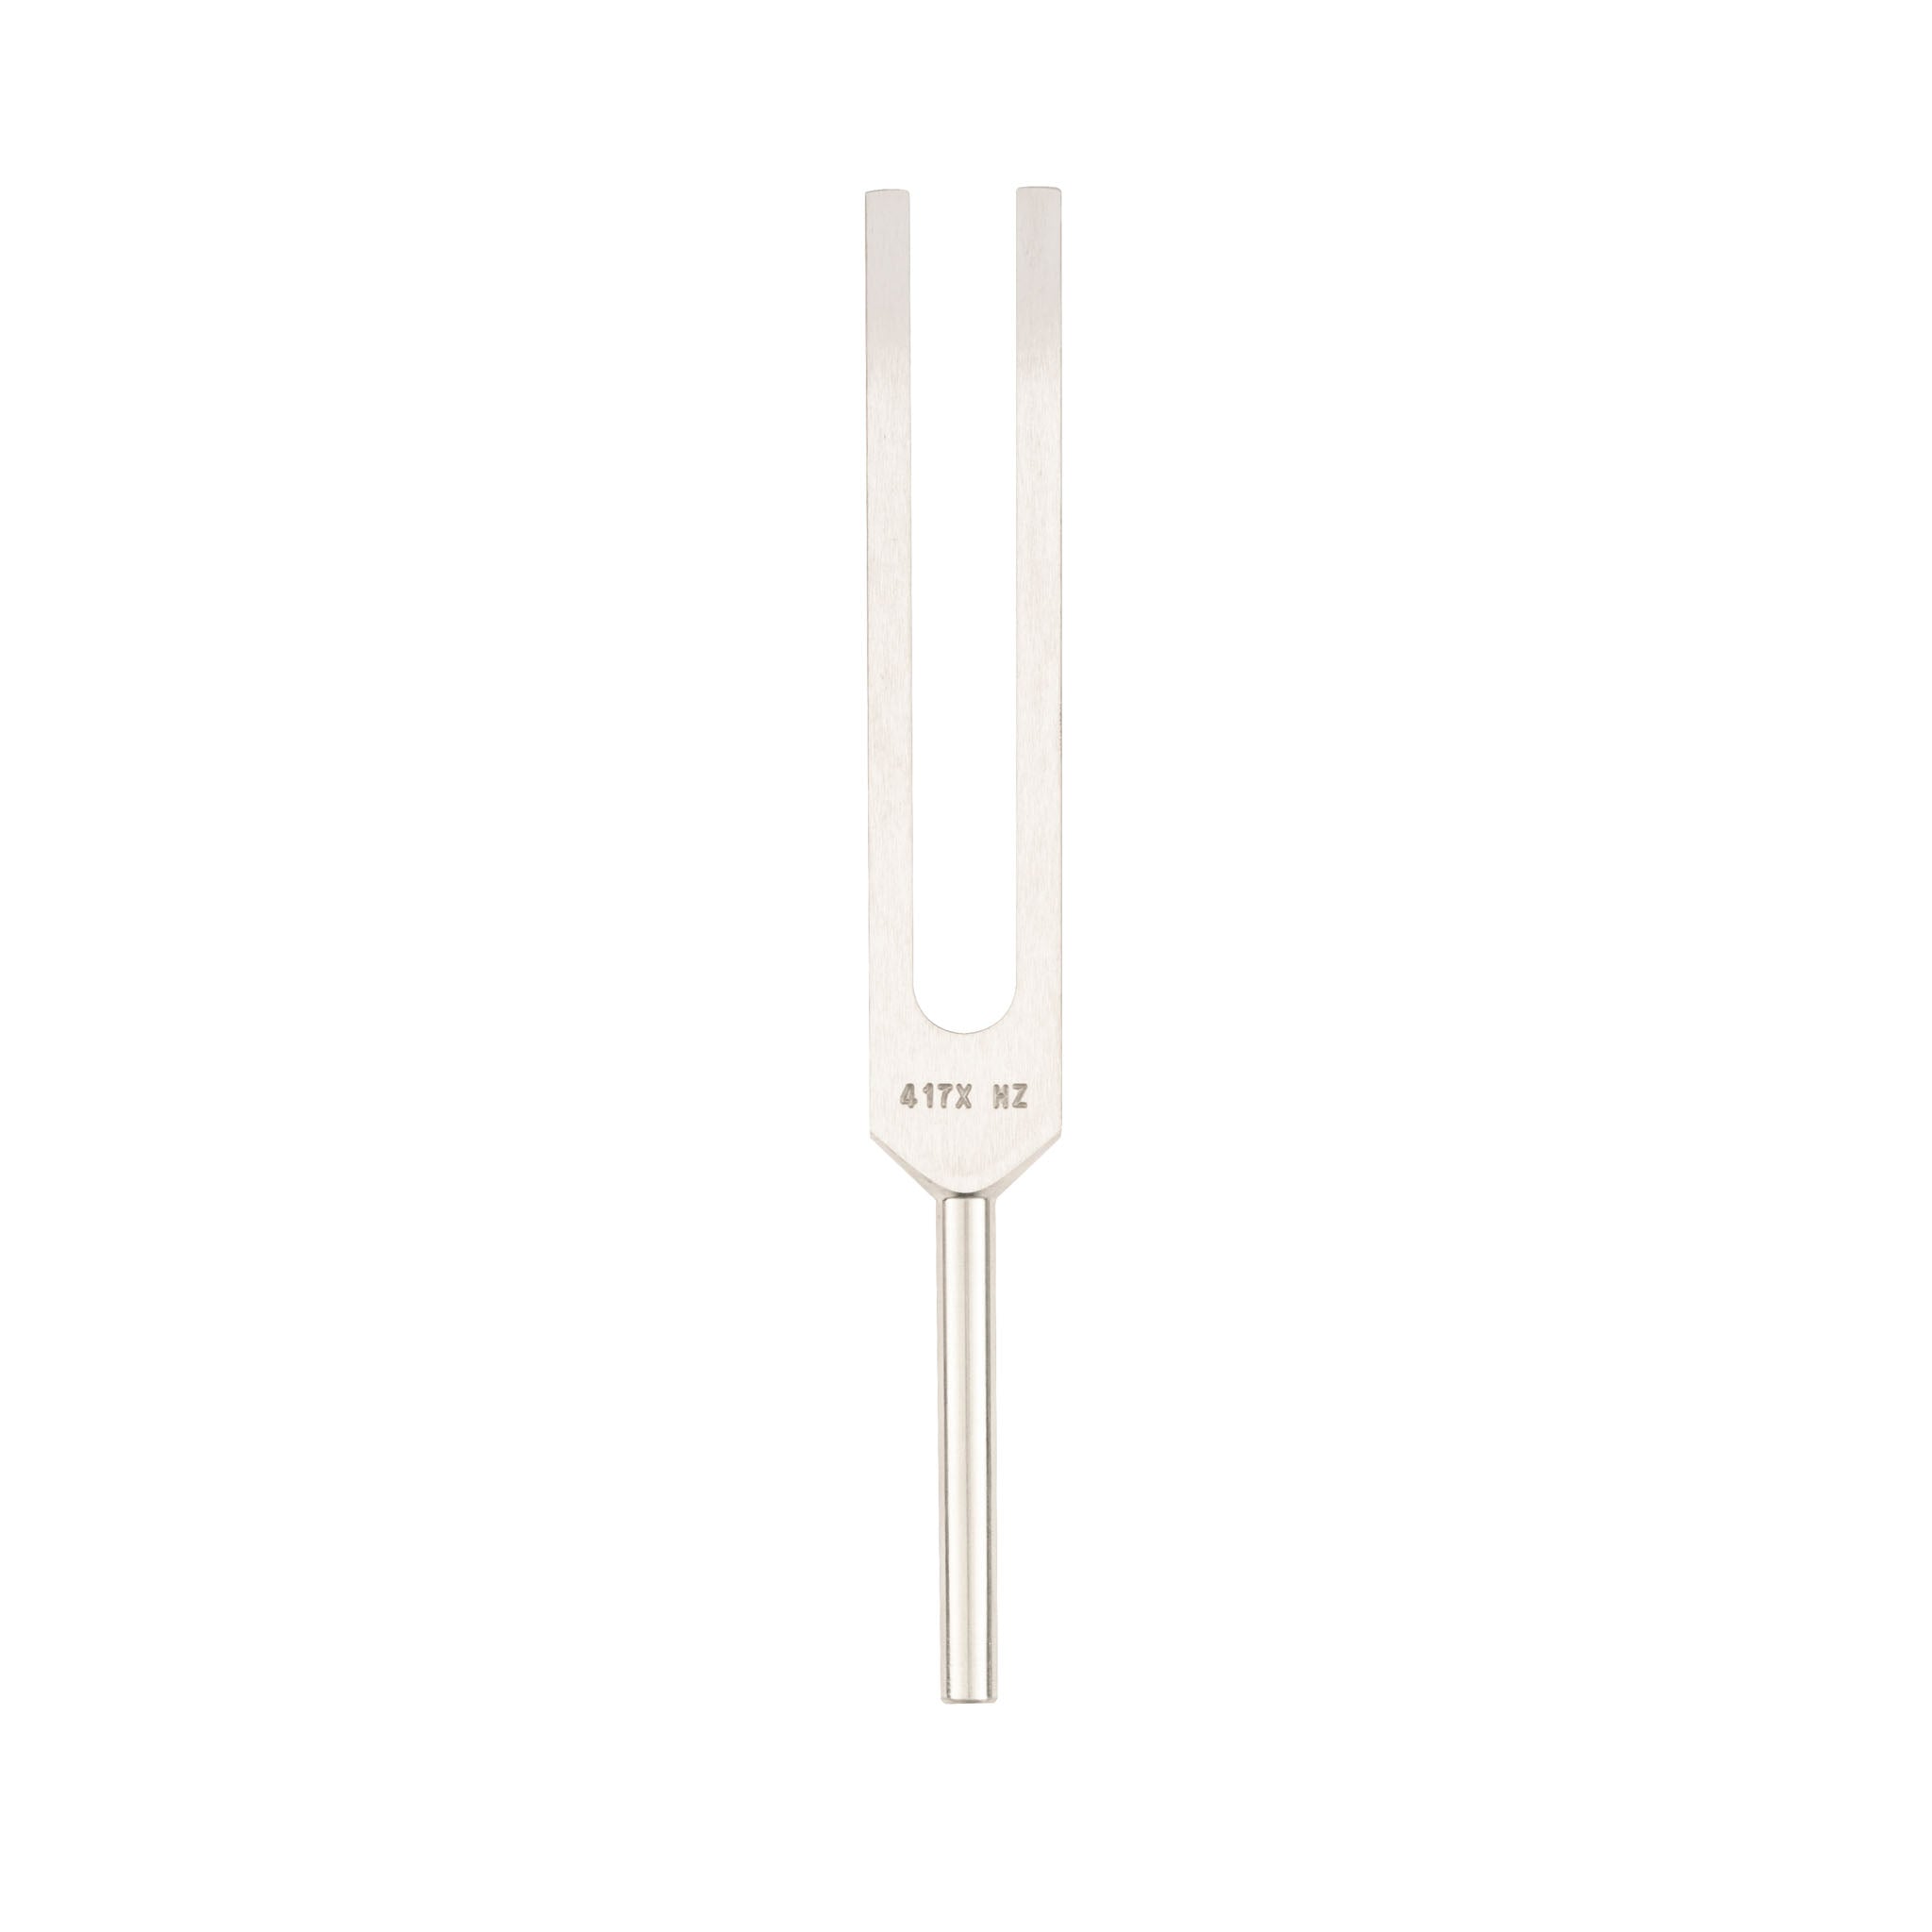 a 432 tuning fork